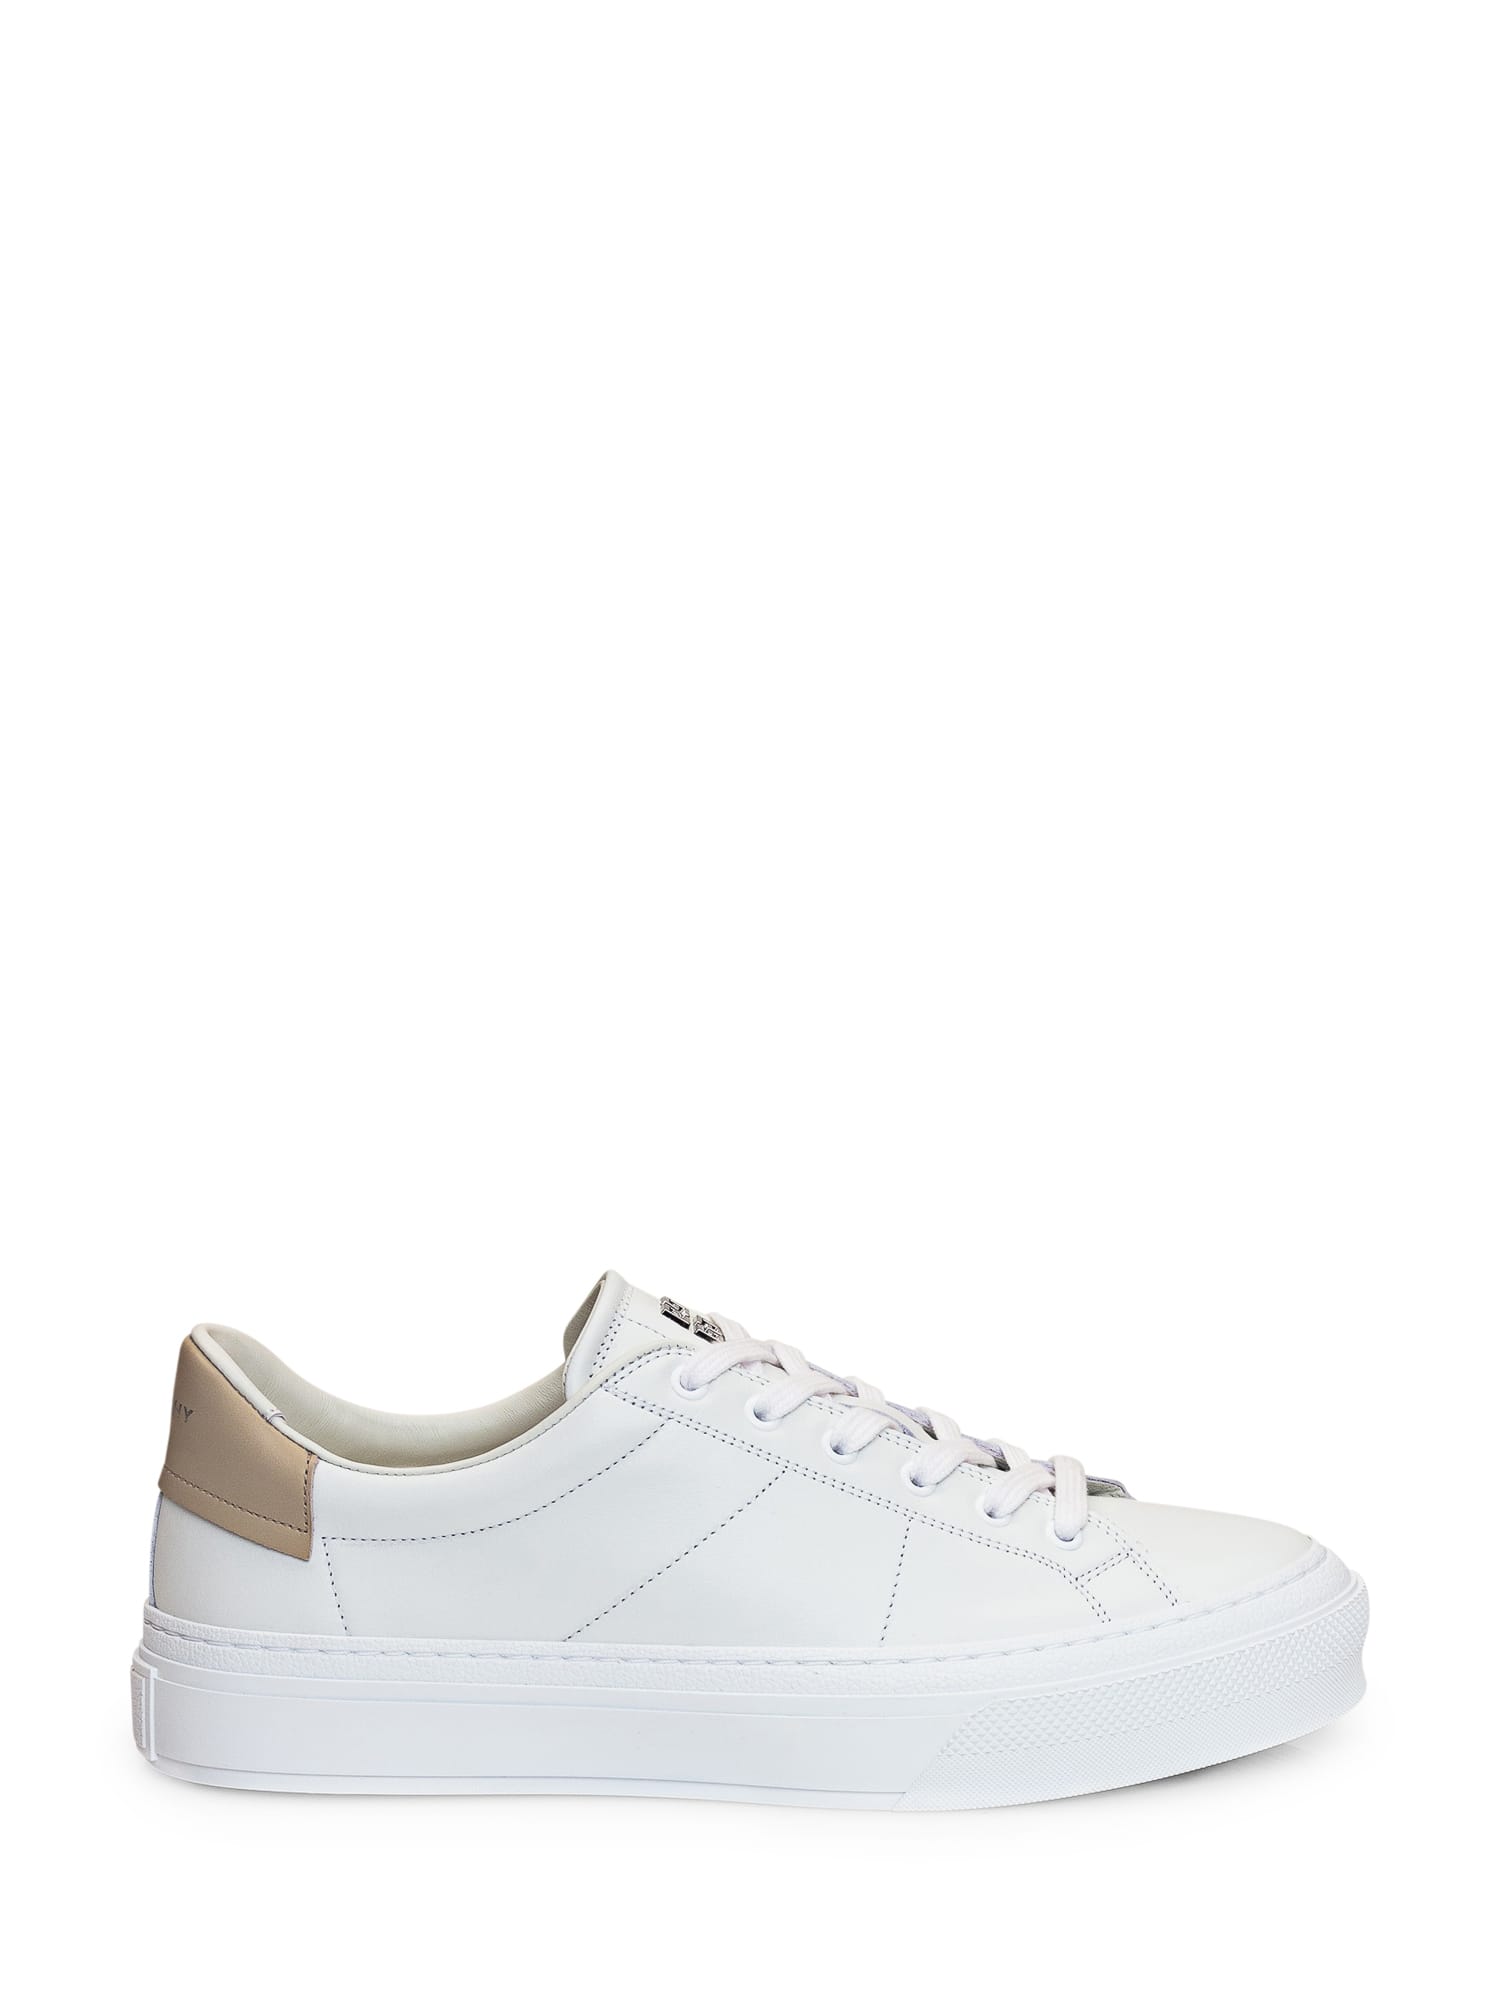 GIVENCHY CITY SPORT SNEAKER